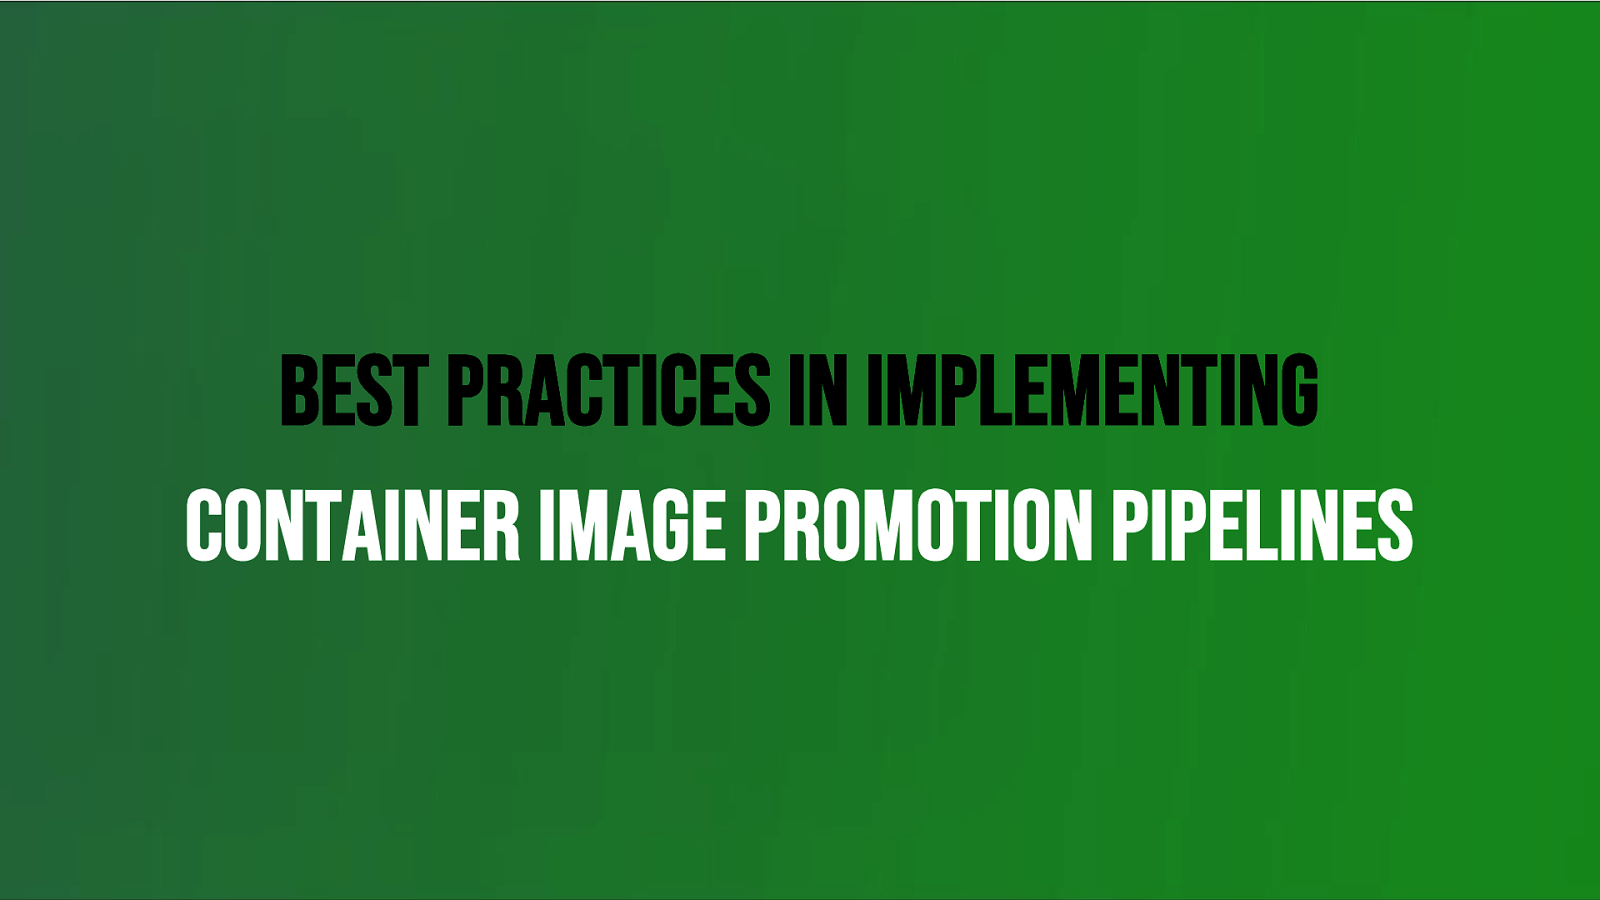 Best Practices In Implementing Container Image Promotion Pipelines